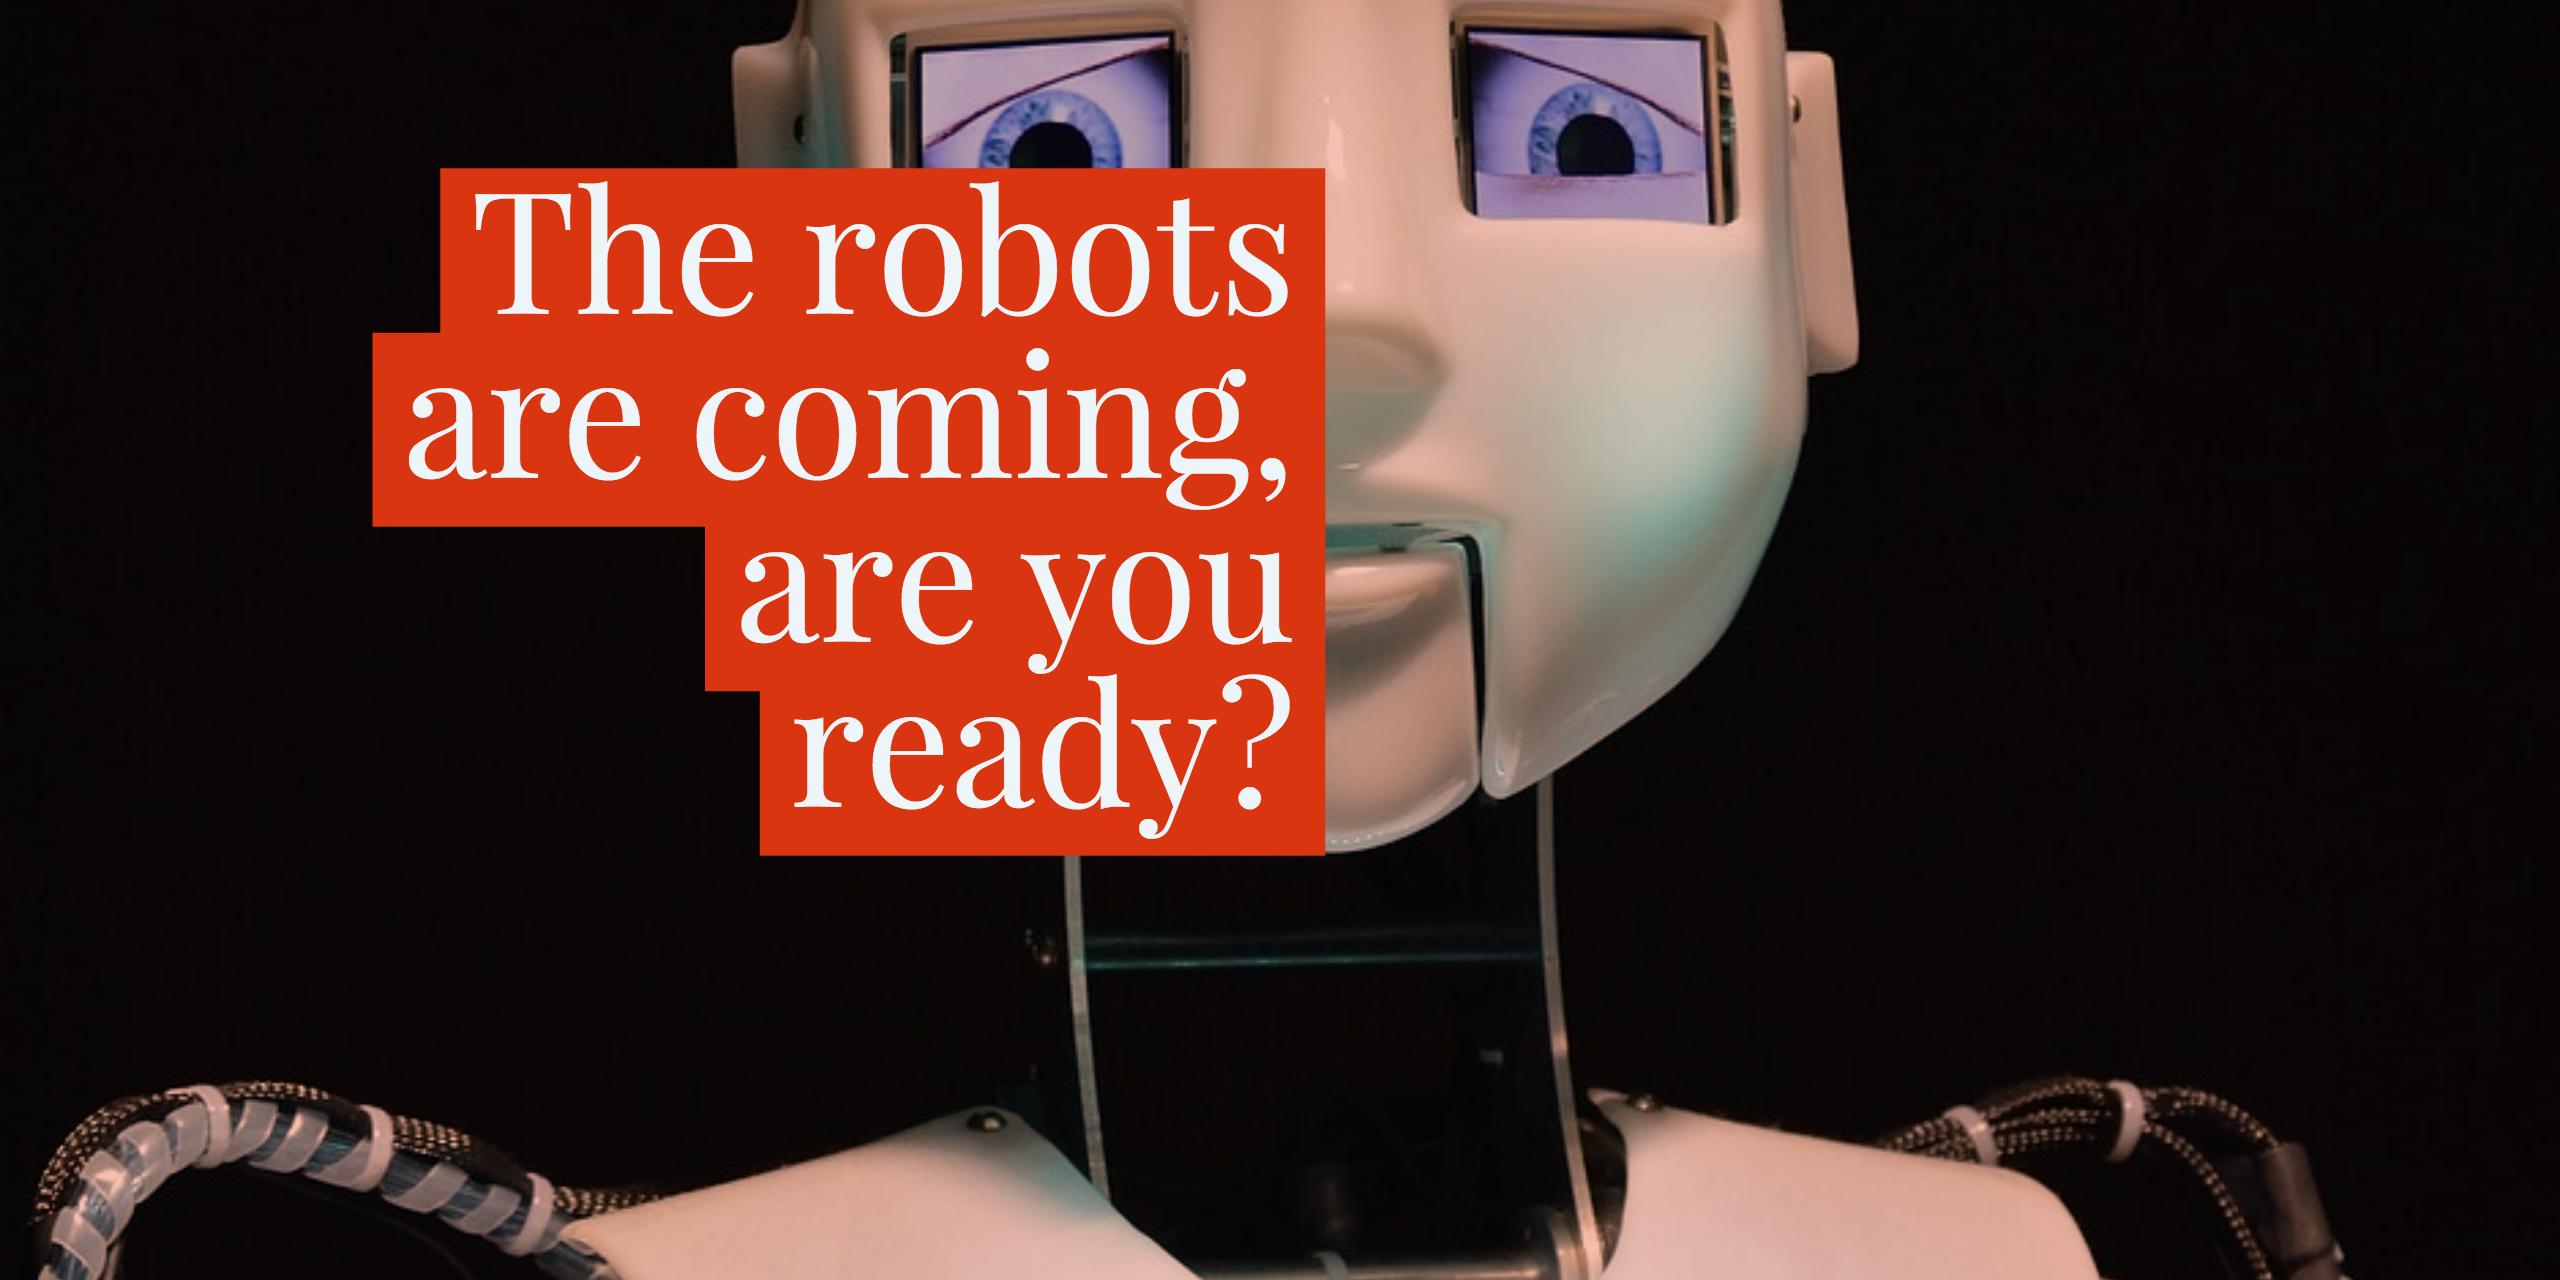 The robots are coming, are you ready?